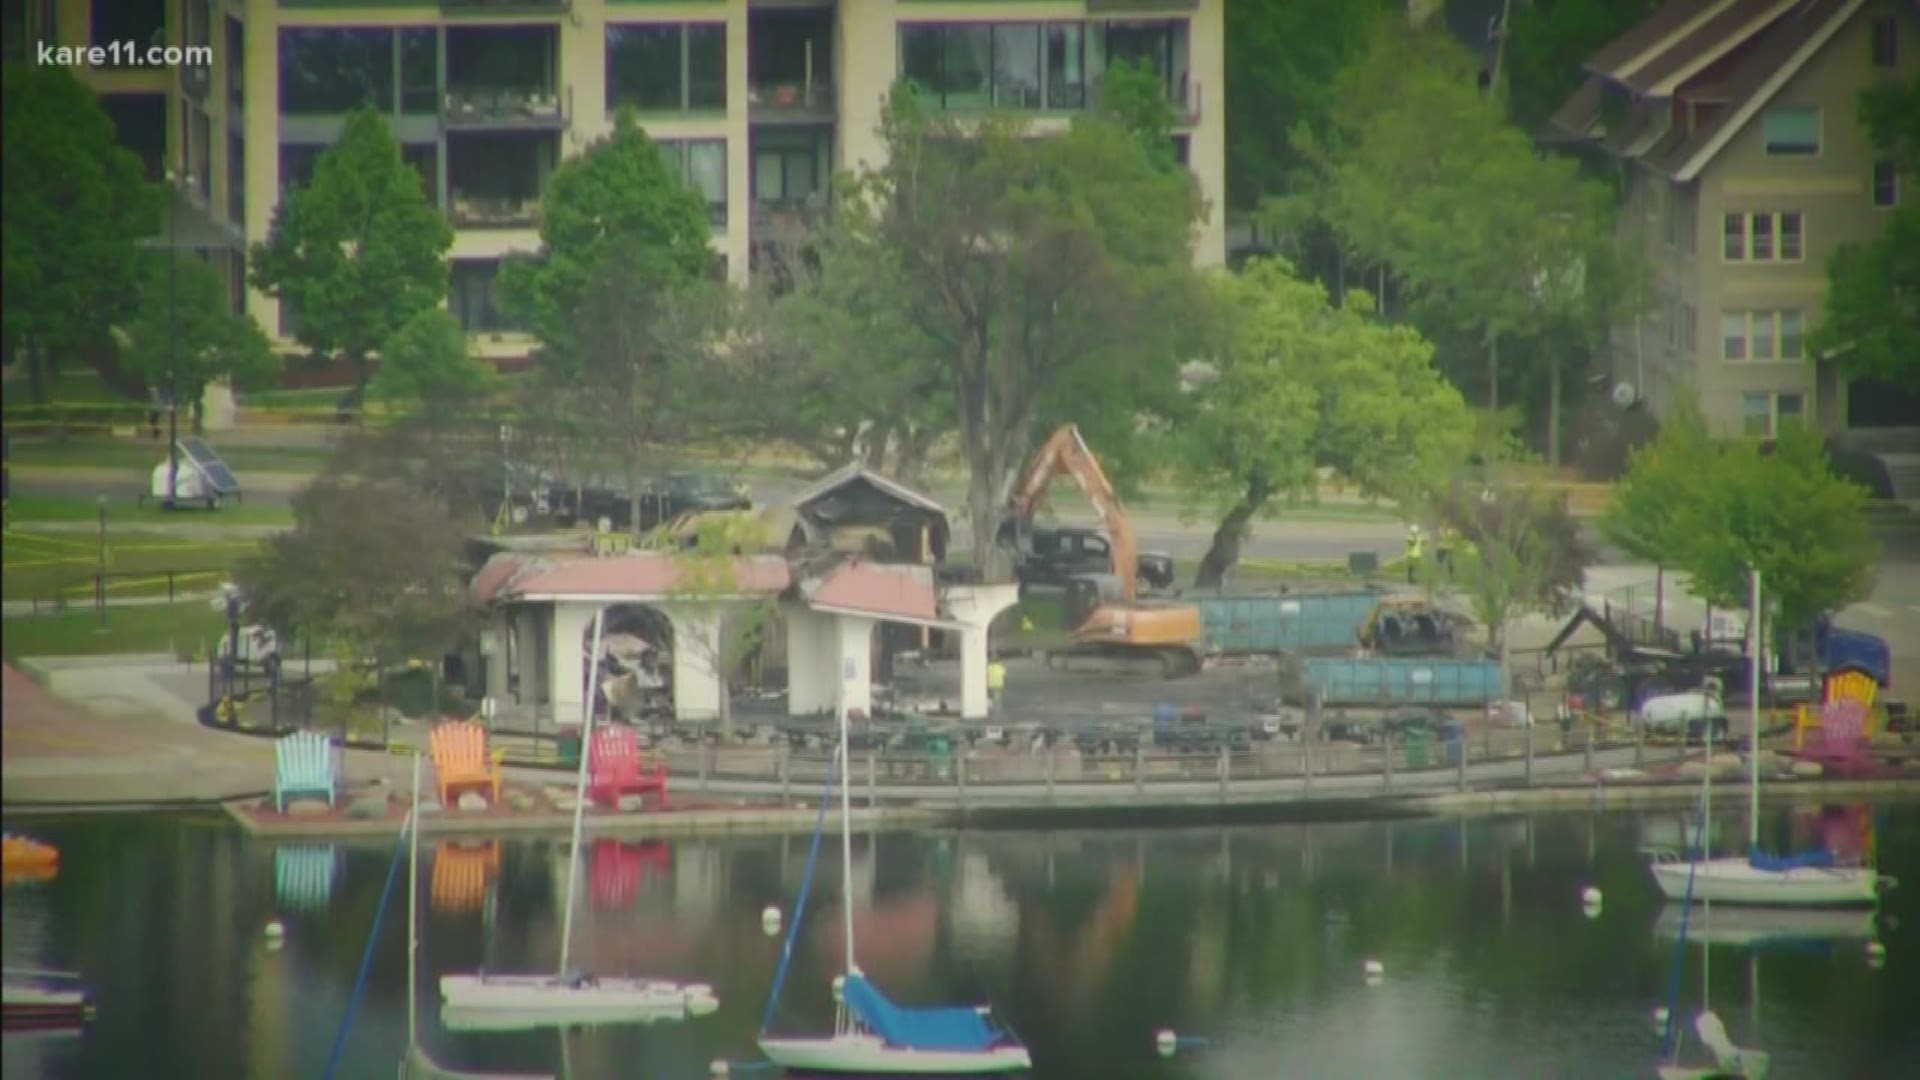 Heavy equipment began tearing down the pavilion late Tuesday morning.